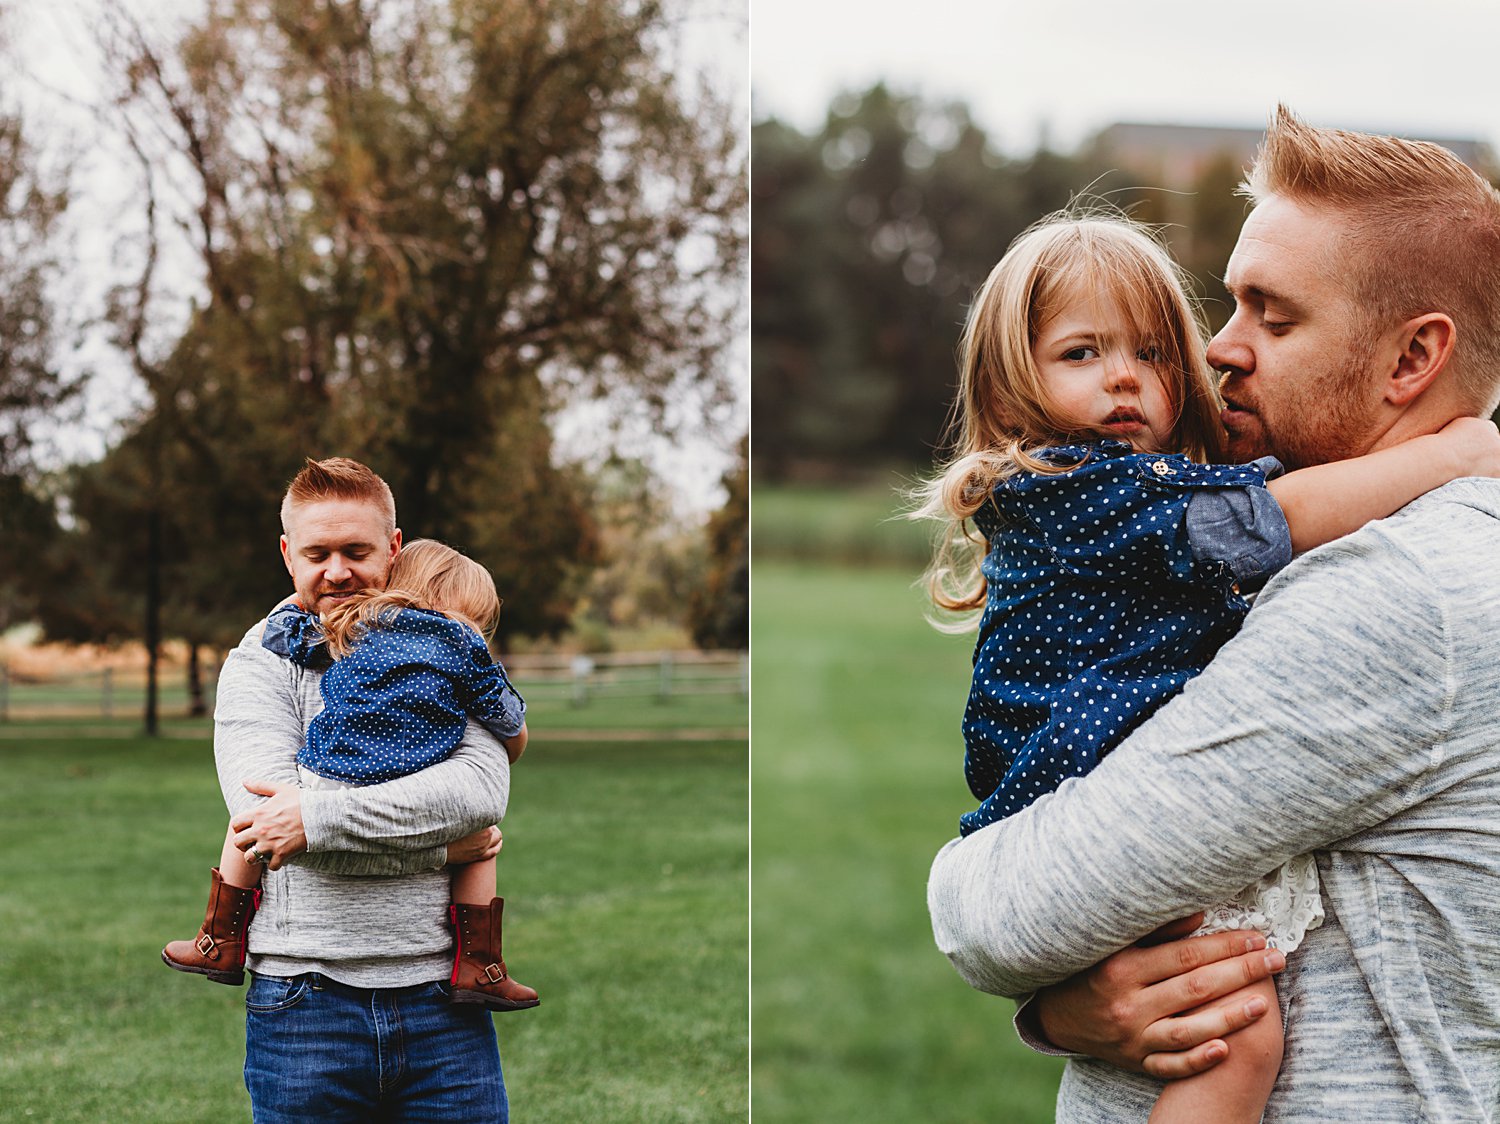 Candid portraits of dad holding toddler girl in arms affectionately